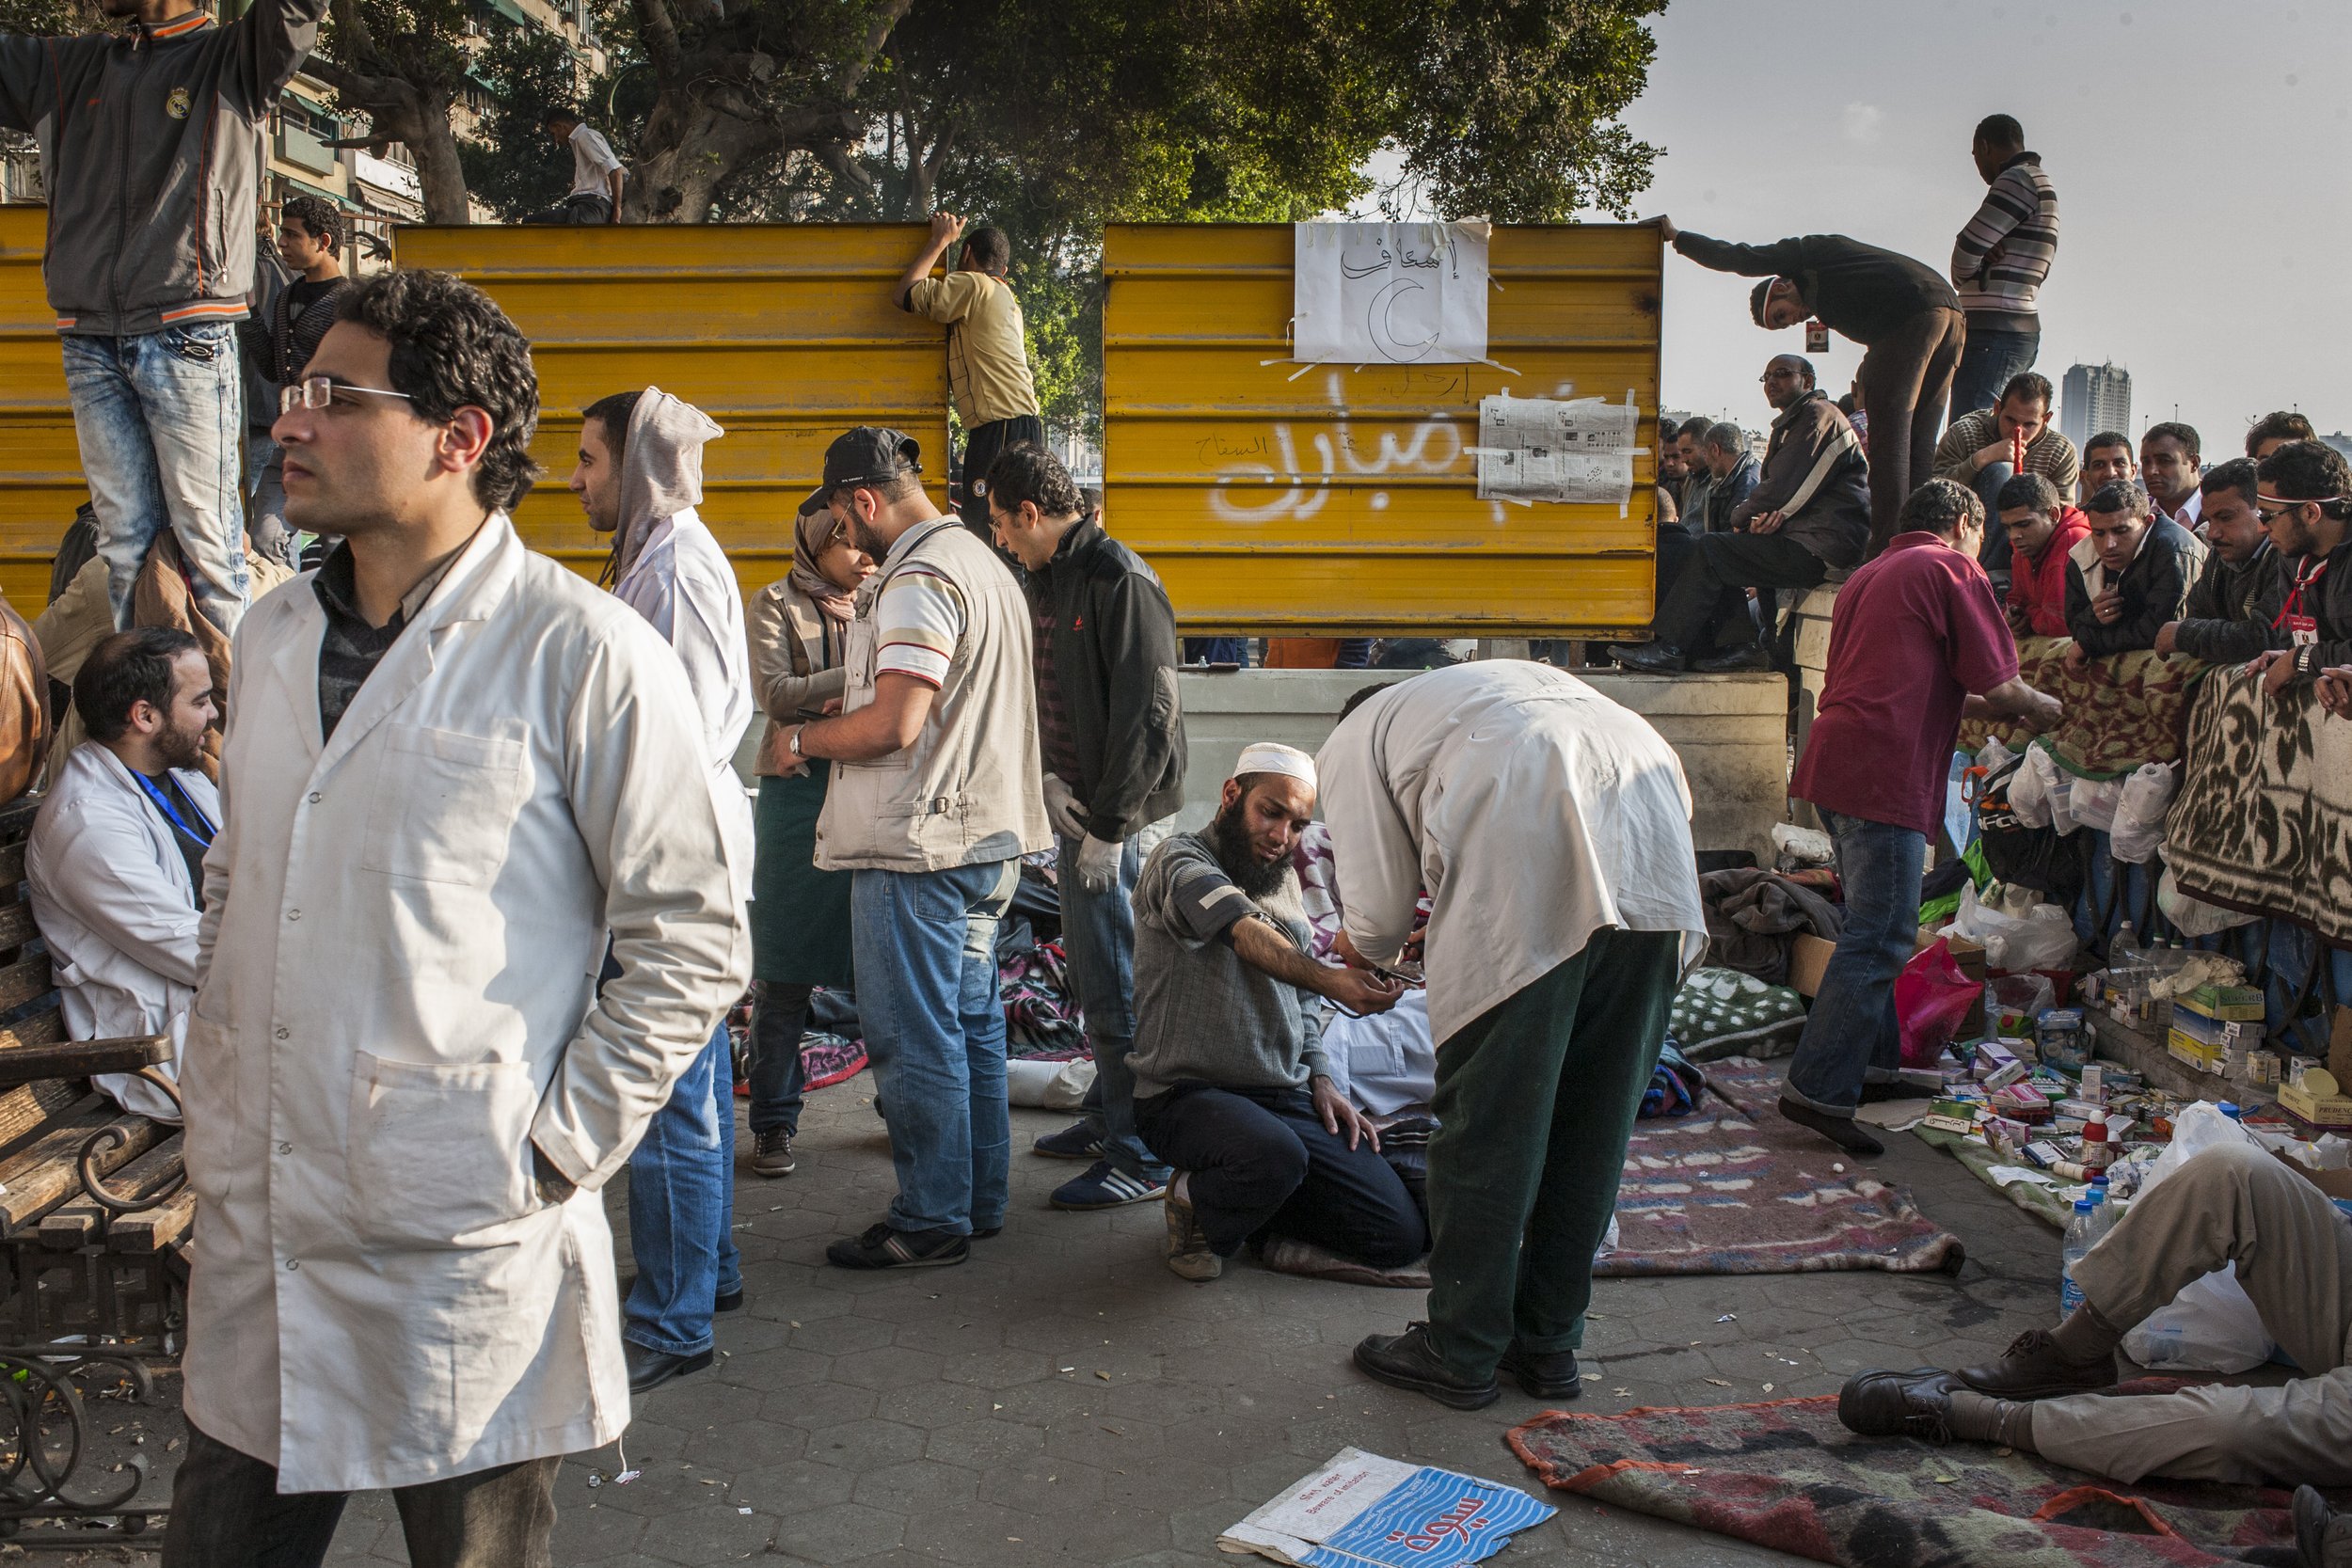  A man is treated by a volunteer doctor at the first aid point set up on the morning of 11/02/2011 to cope with any injuries sustained to protesters.  